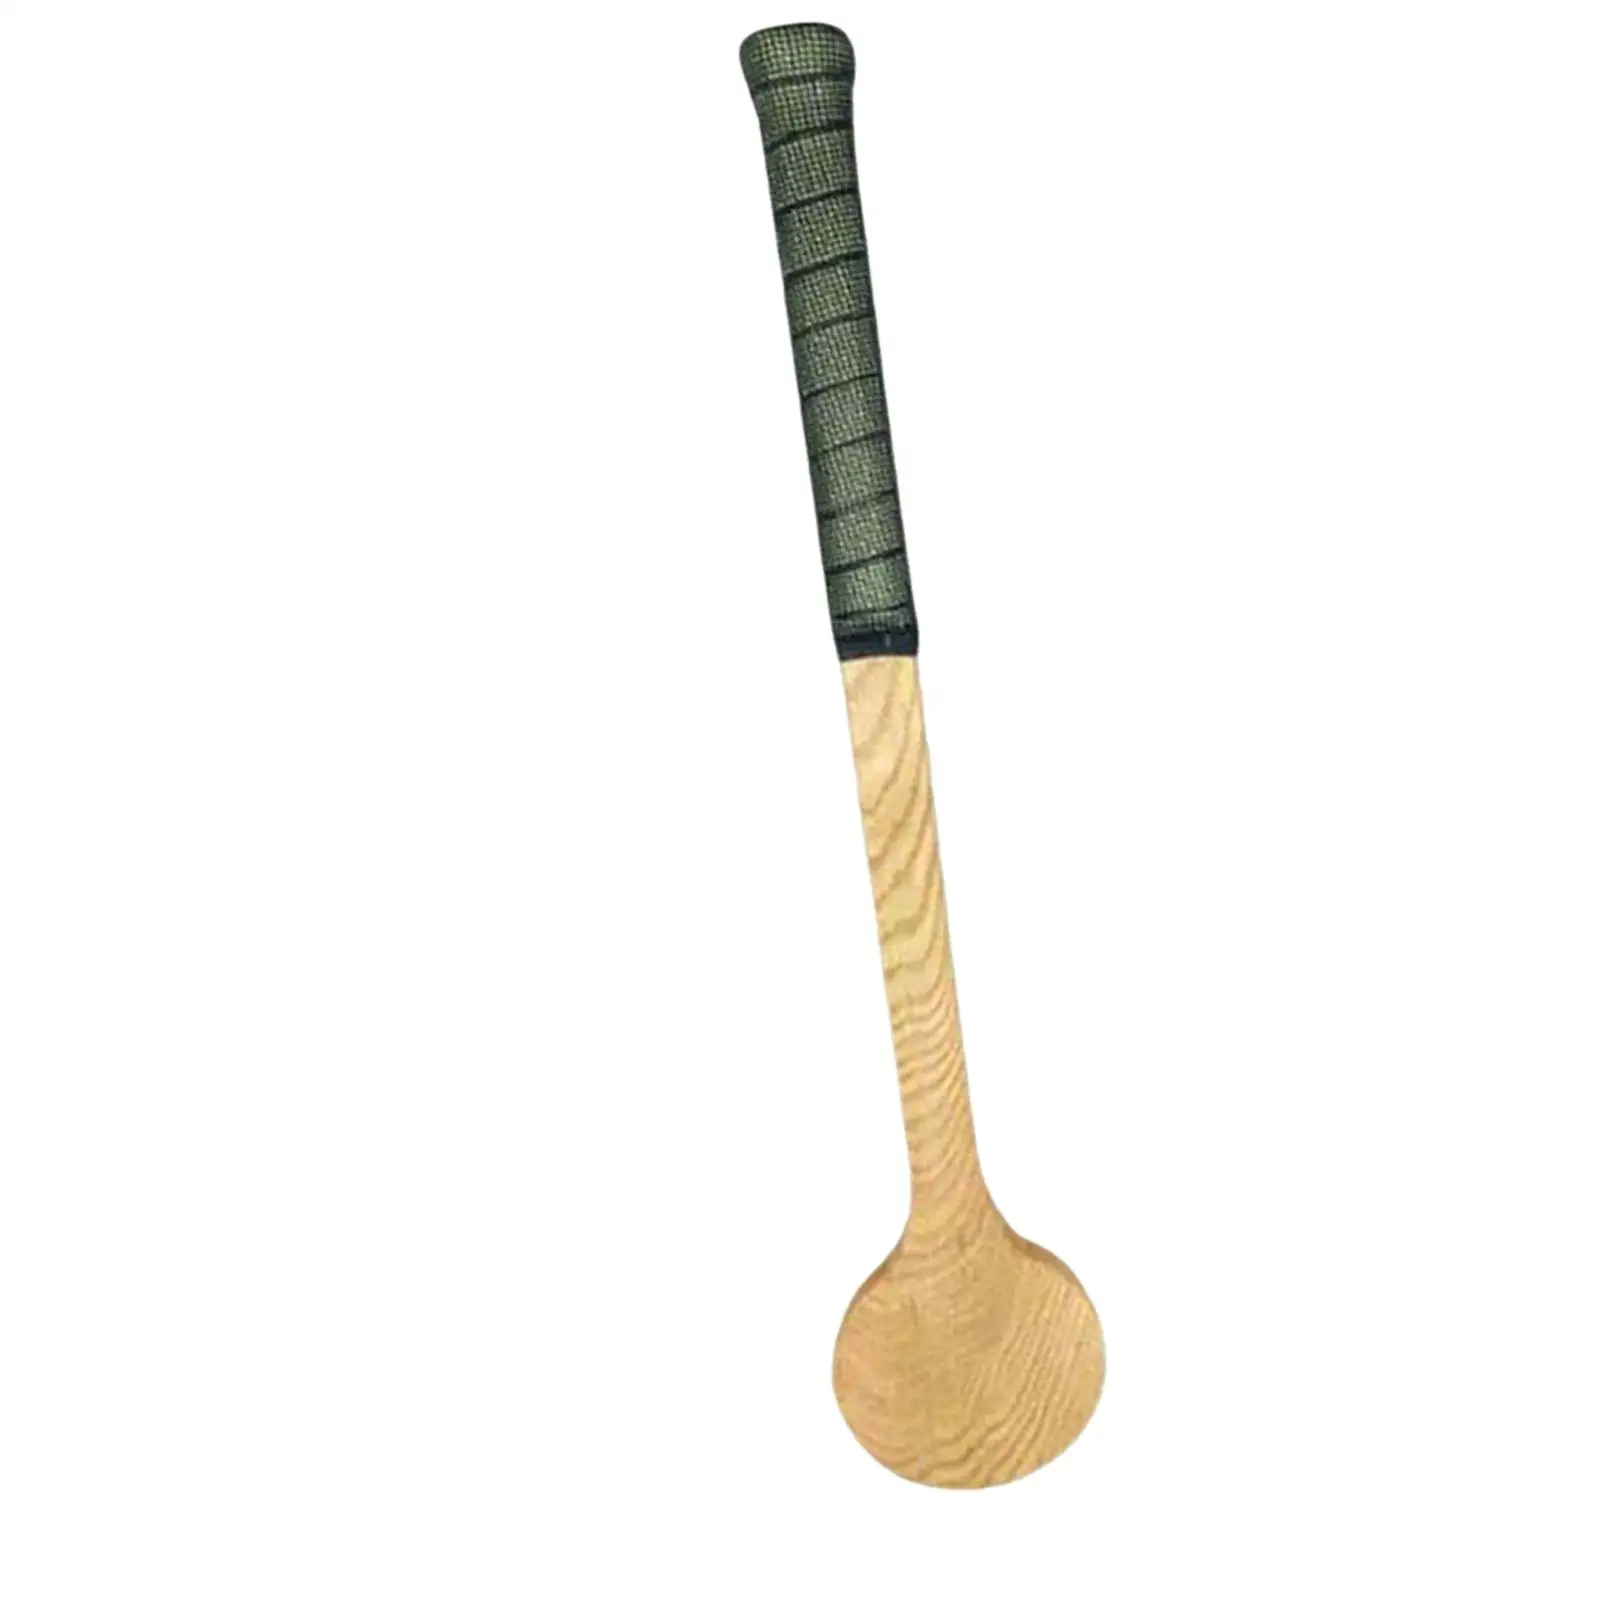 Tennis Sweet Pointer Spoon Coached and Tennis Players Overgrip for Accurately Hit